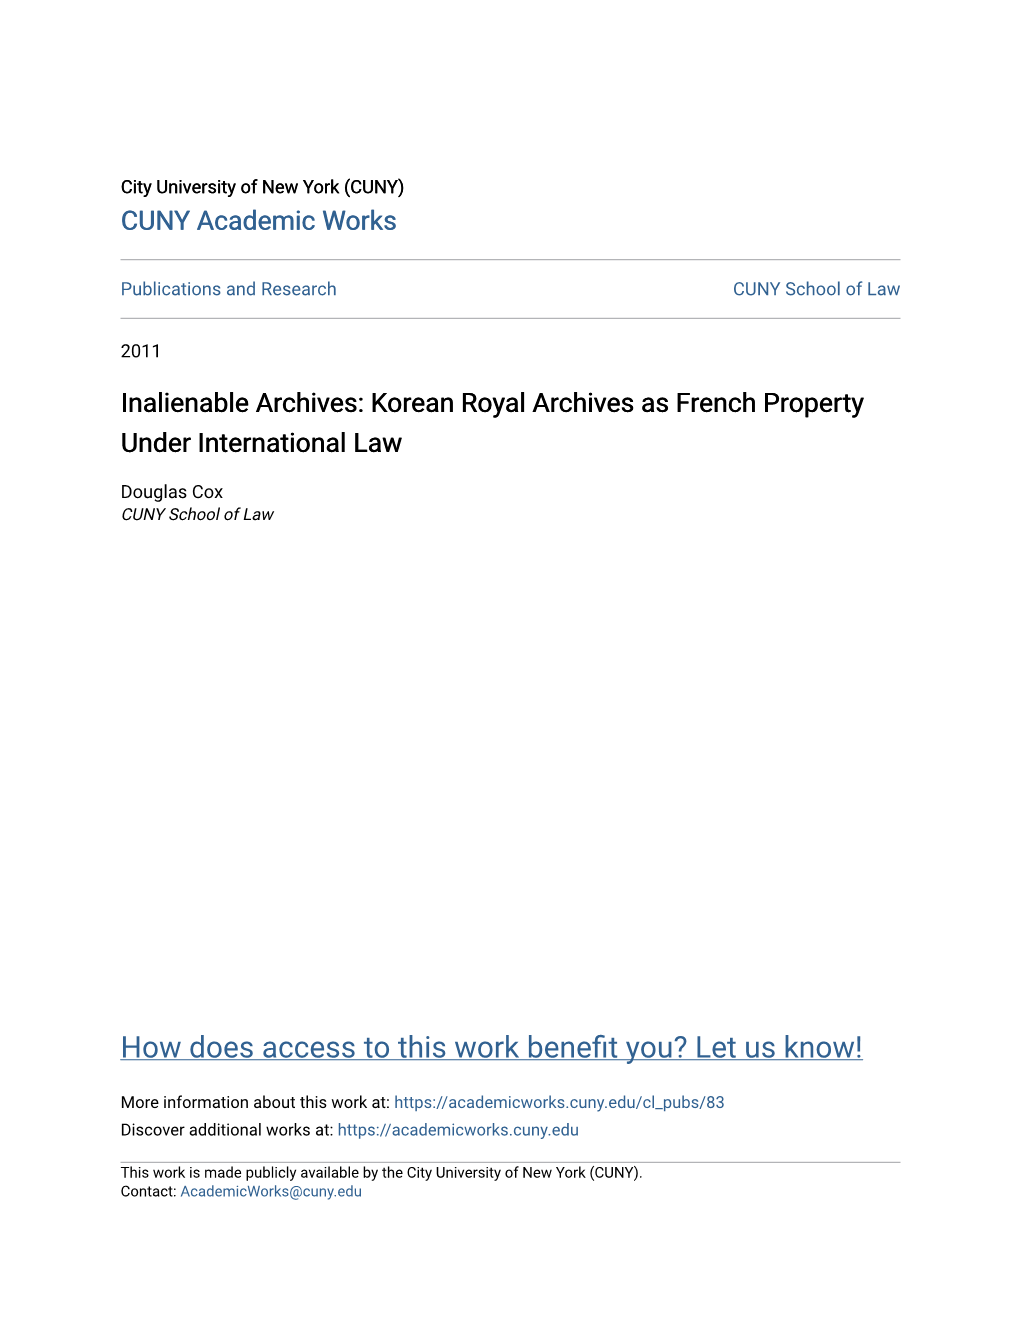 Korean Royal Archives As French Property Under International Law